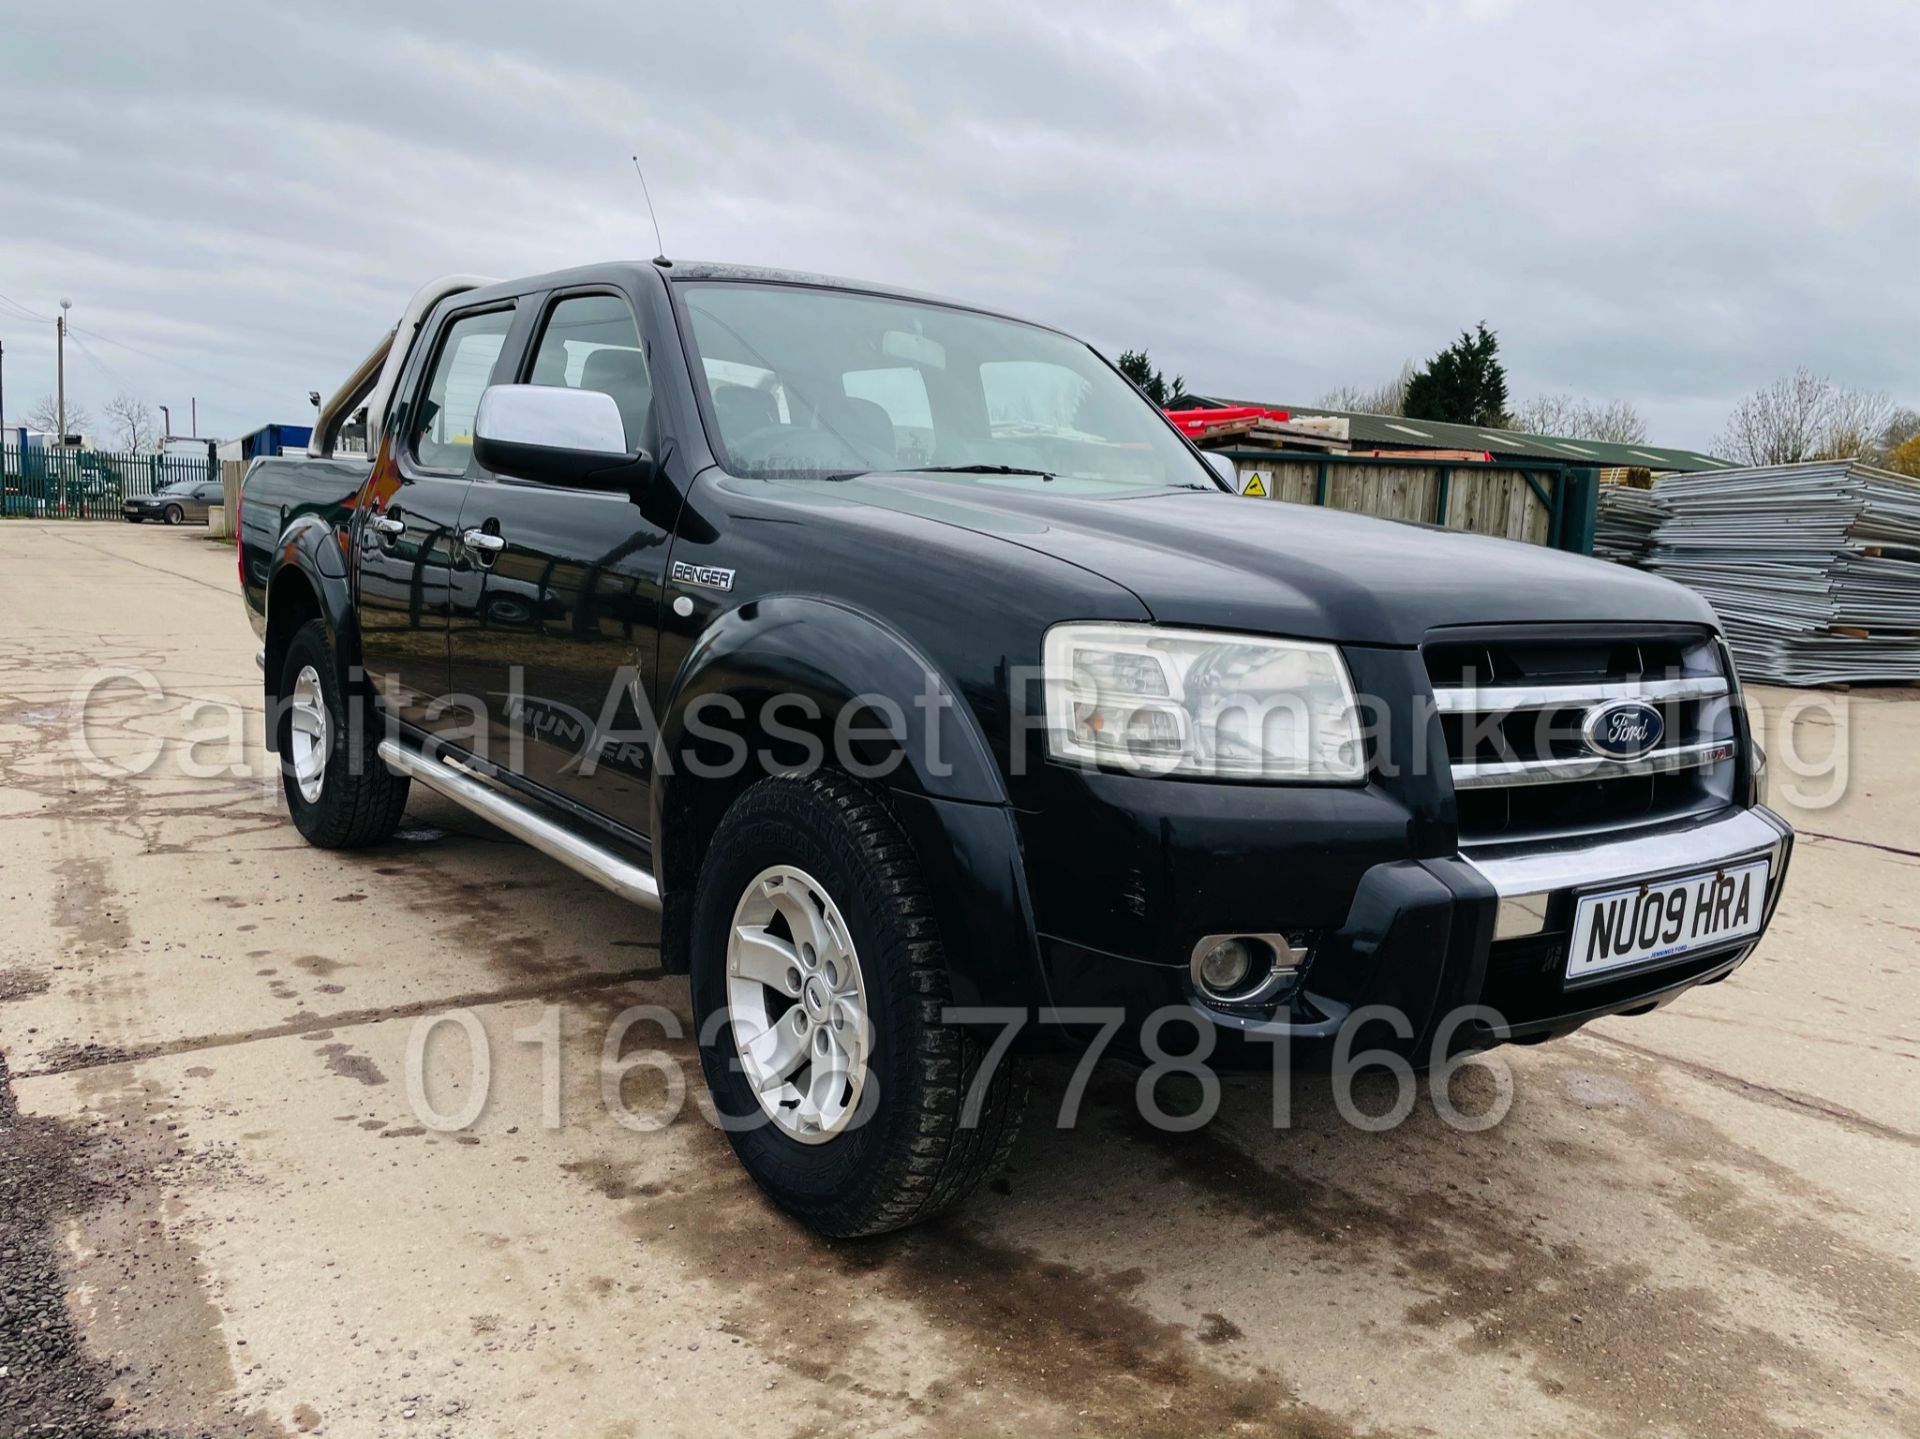 ON SALE FORD RANGER *THUNDER* DOUBLE CAB 4X4 PICK-UP (2009) '2.5 TDCI - 1 *LEATHER - A/C* (NO VAT) - Image 3 of 40